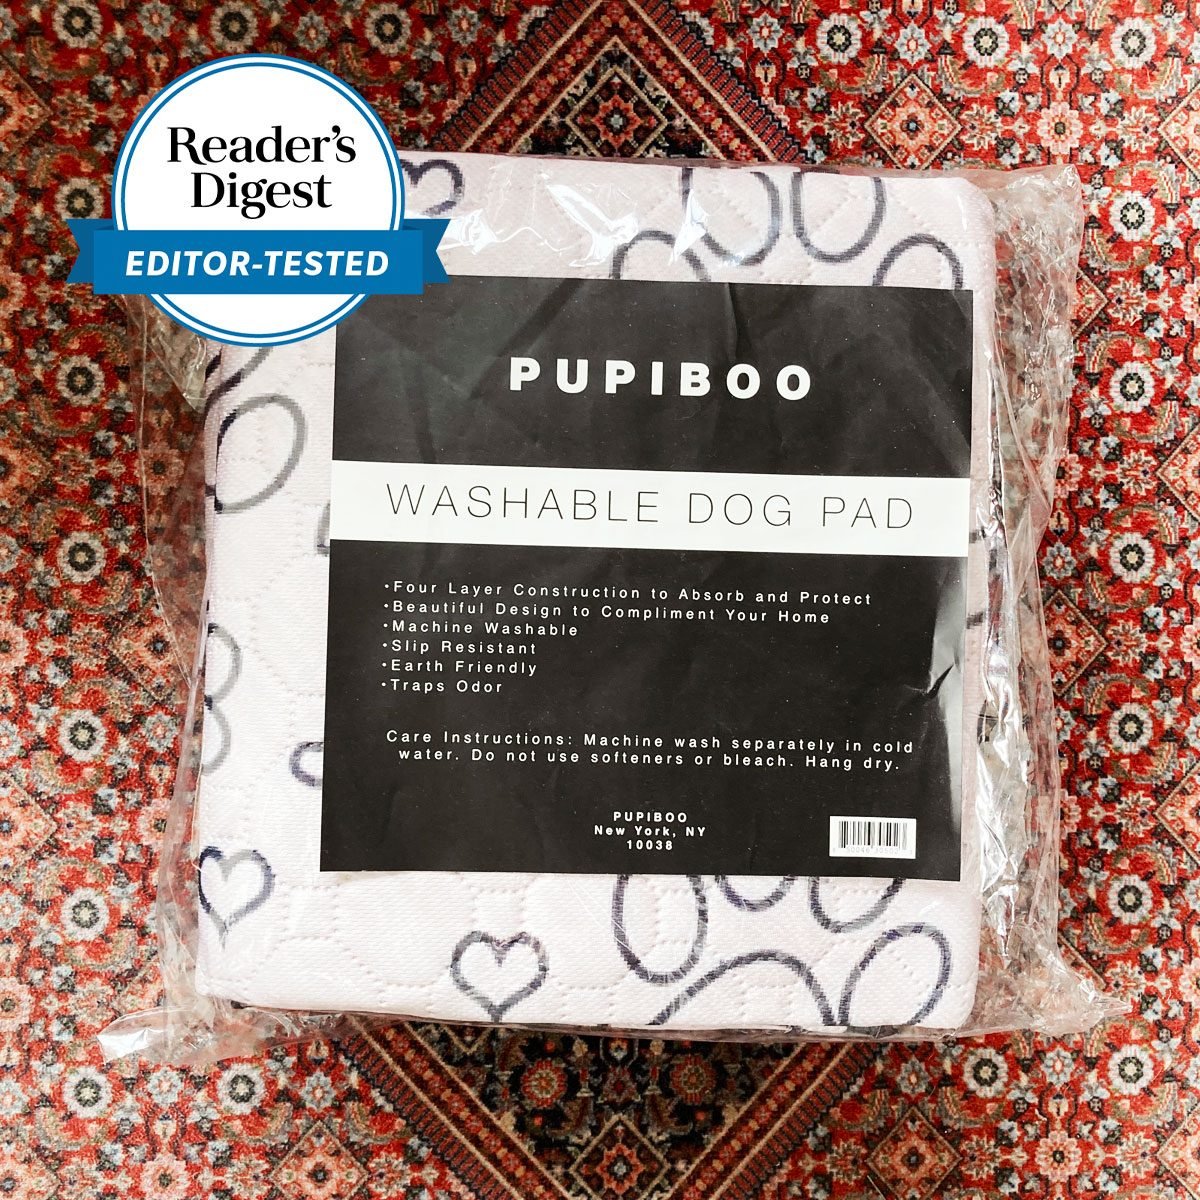 https://www.rd.com/wp-content/uploads/2023/05/RD-Editor-Tested-pupiboo-washable-dog-pads.jpg?fit=700%2C1024